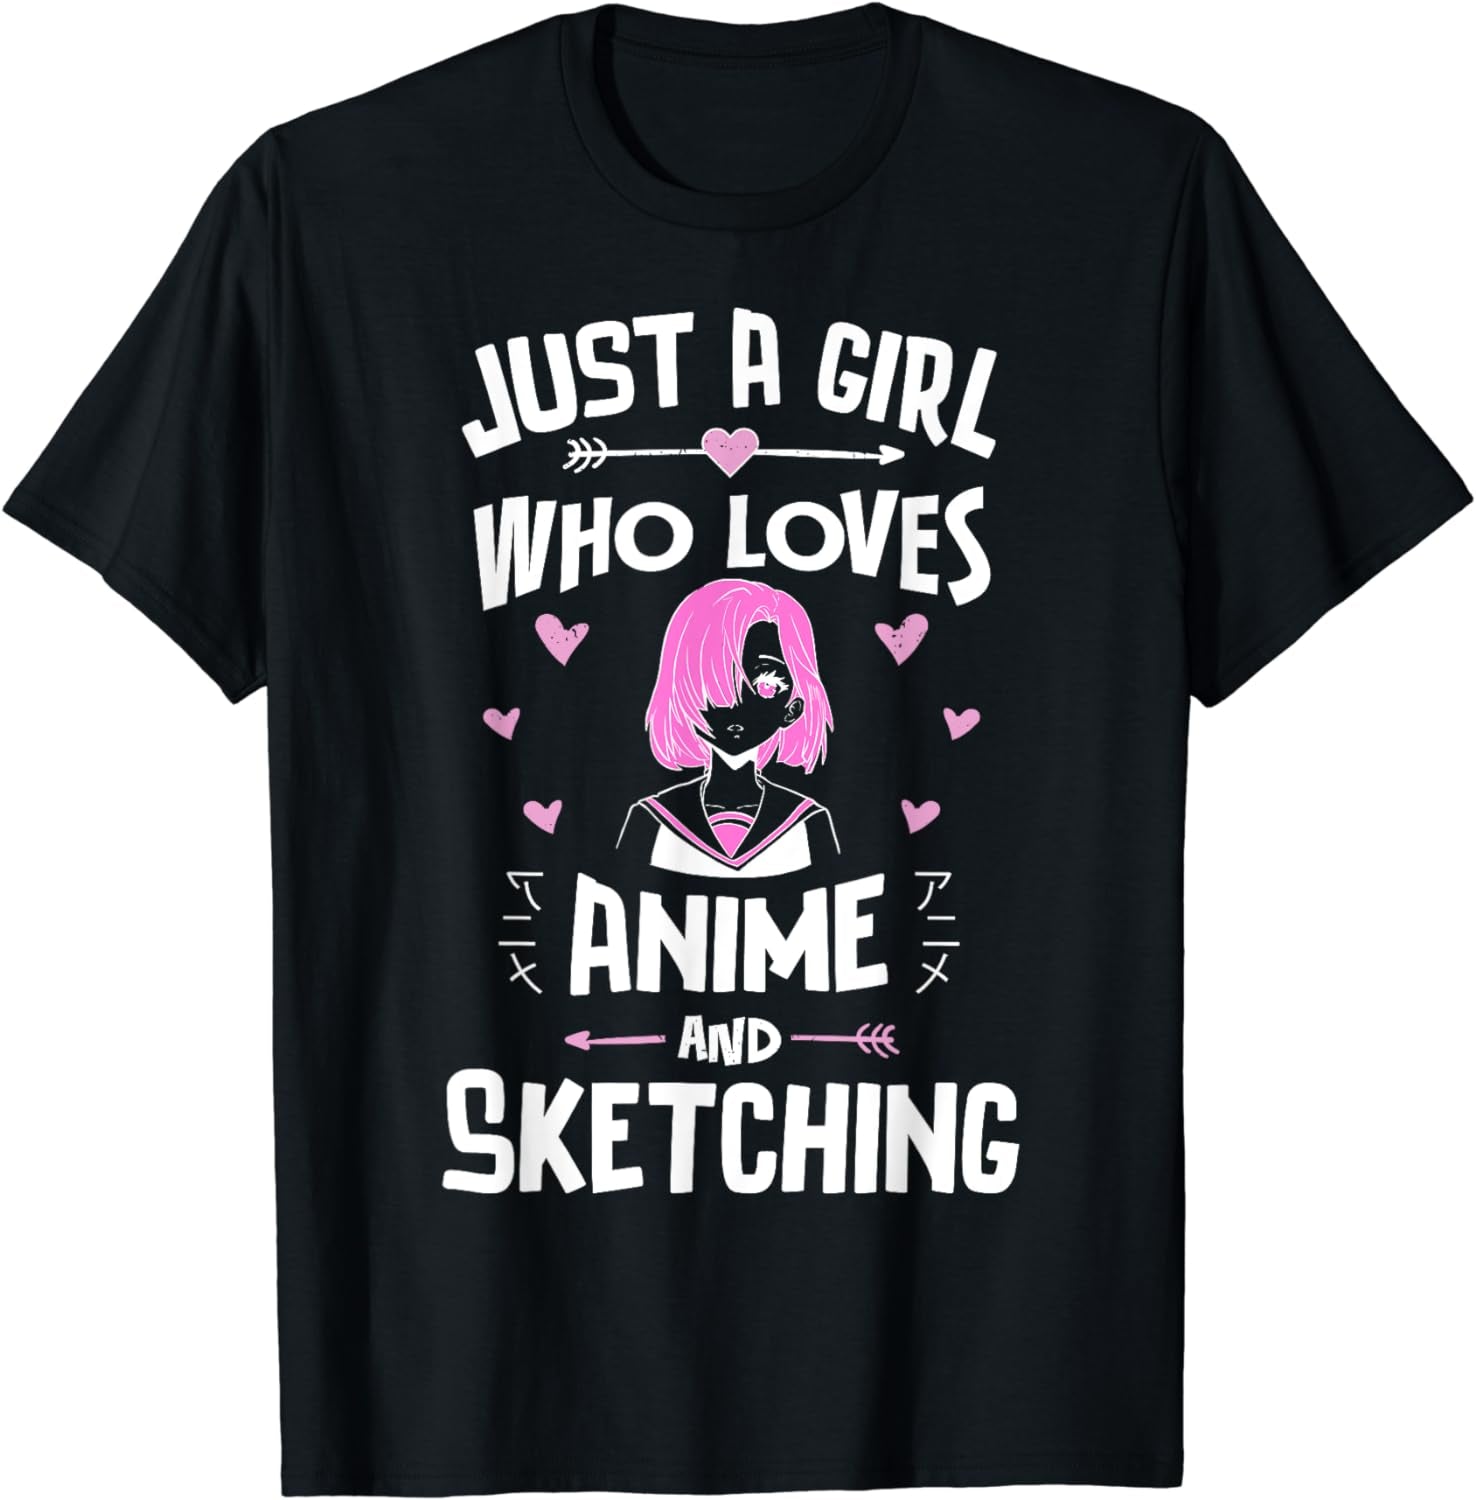 Anime and Sketching, Just a Girl Who Loves Anime T-Shirt